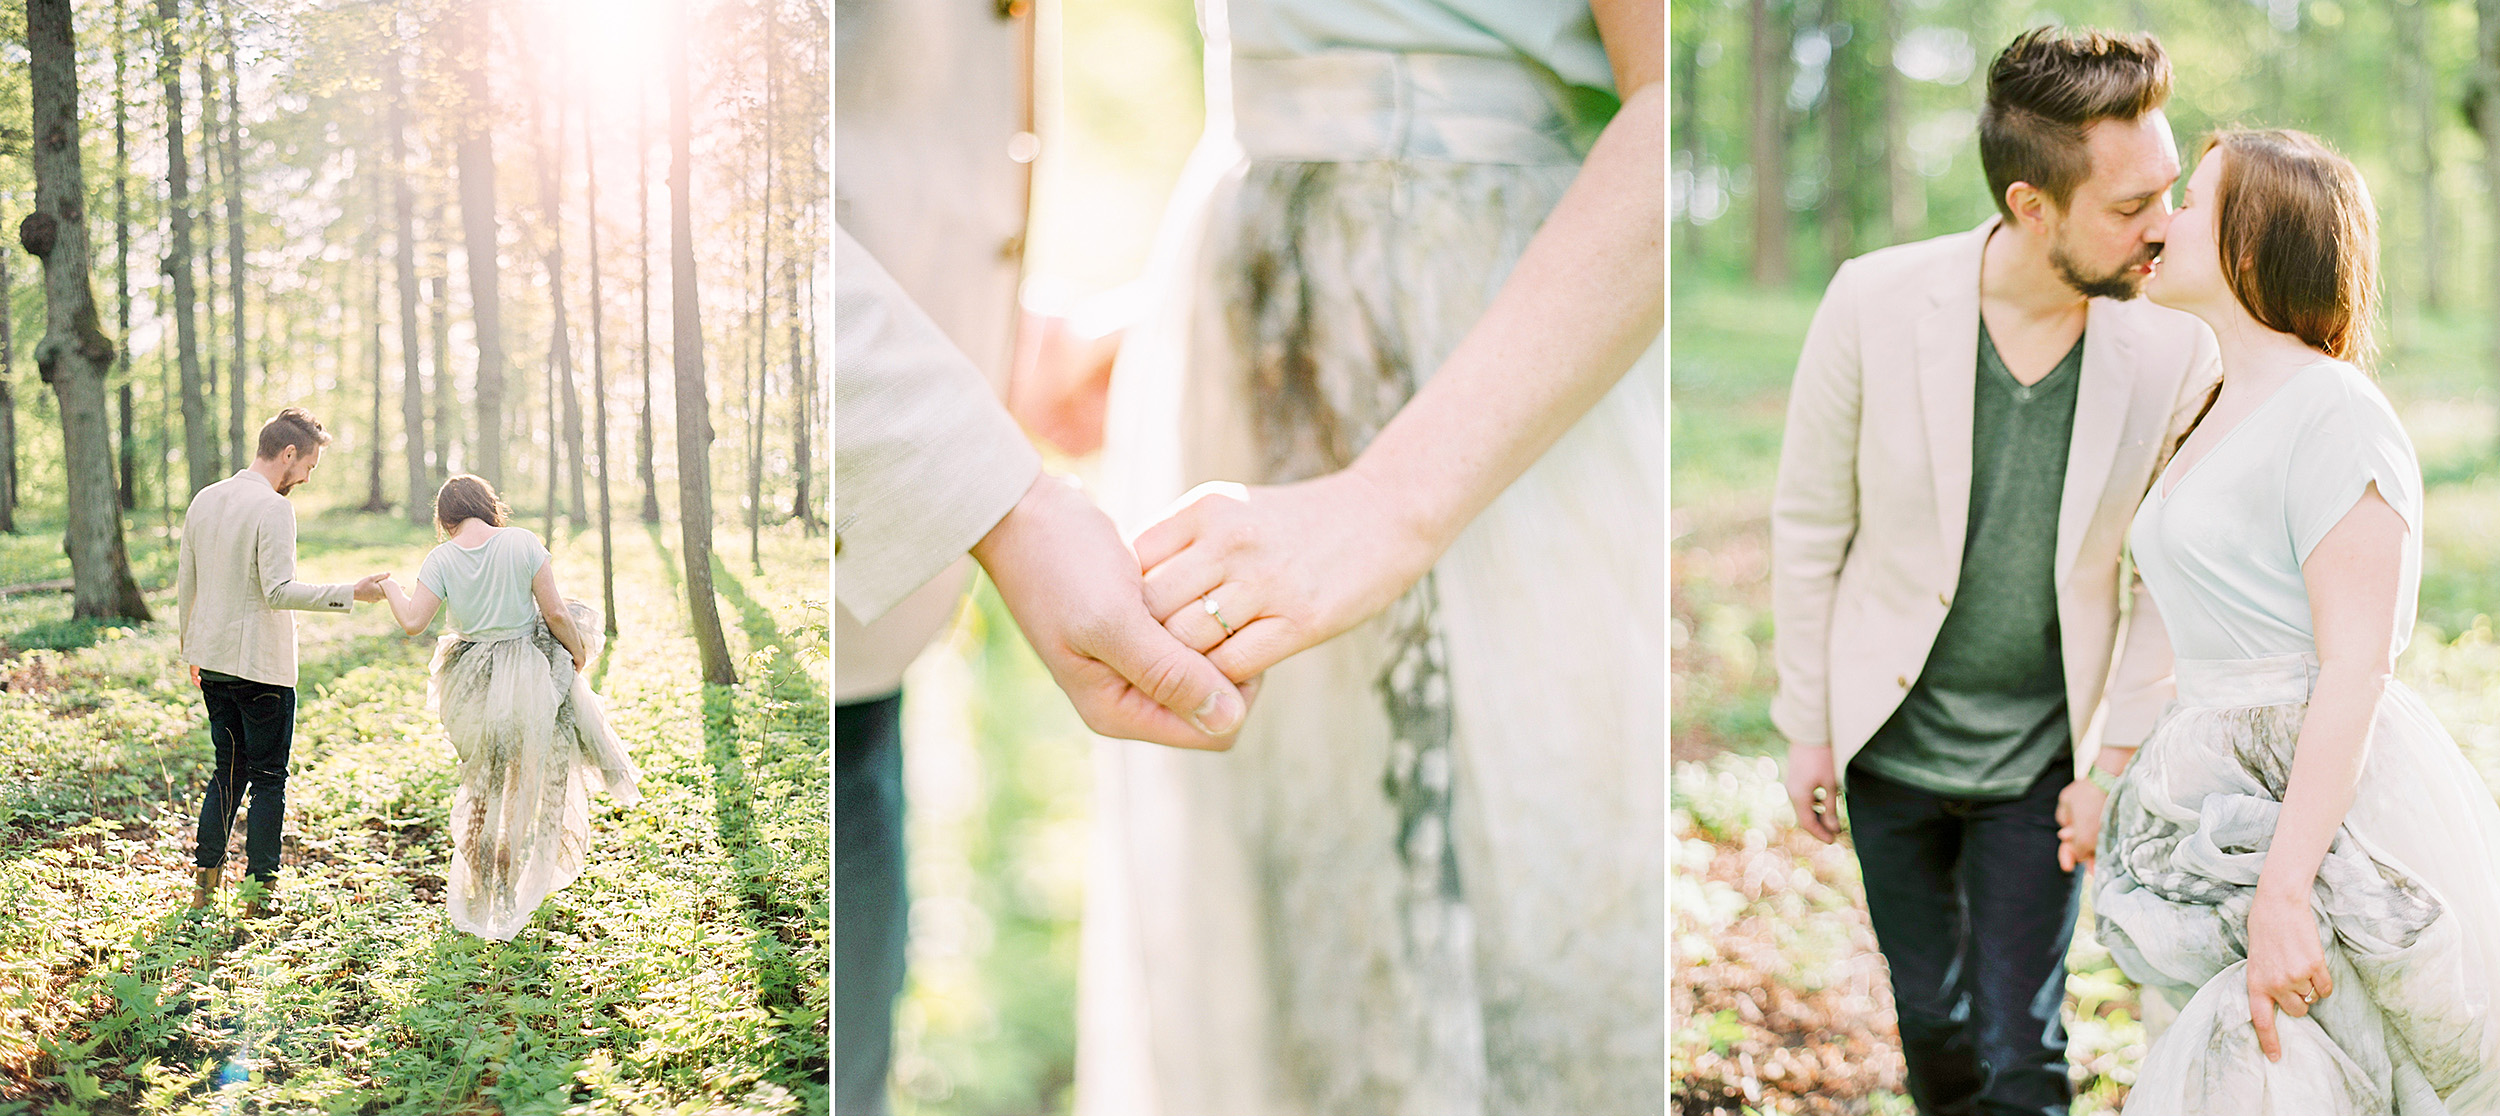 Spring-Engagement-Photos-In-Magical-Stockholm-forrest